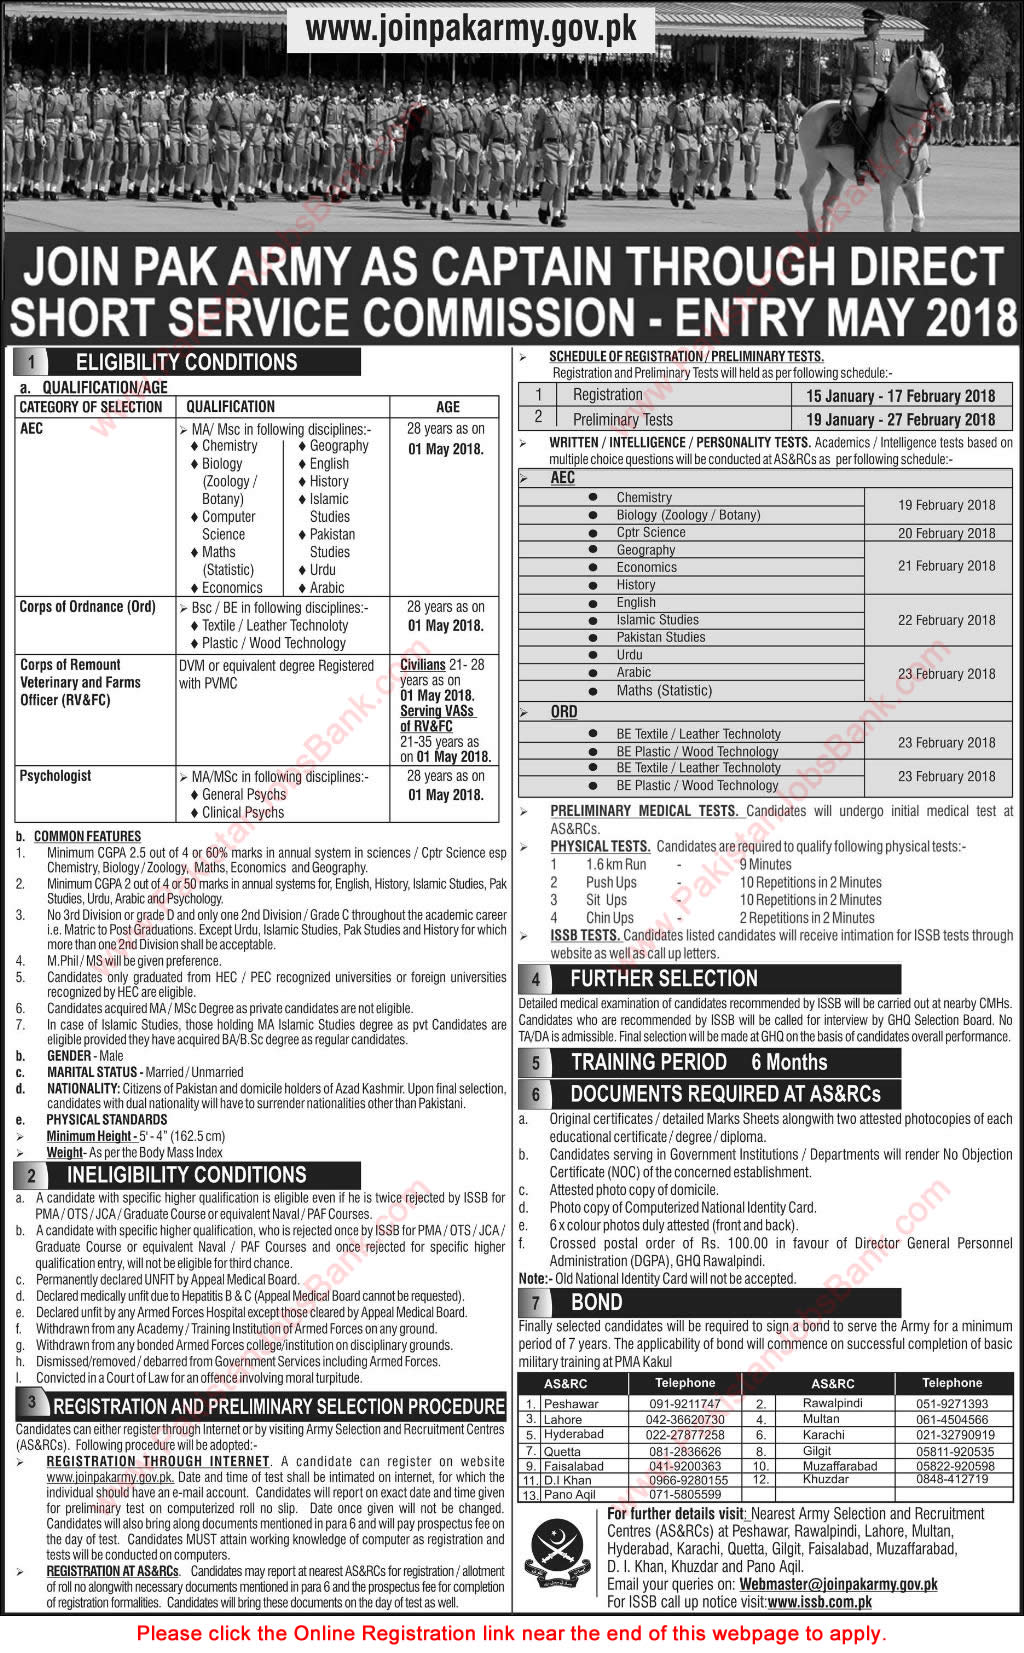 Join Pakistan Army as Captain 2018 through Direct Short Service Commission Online Registration Latest